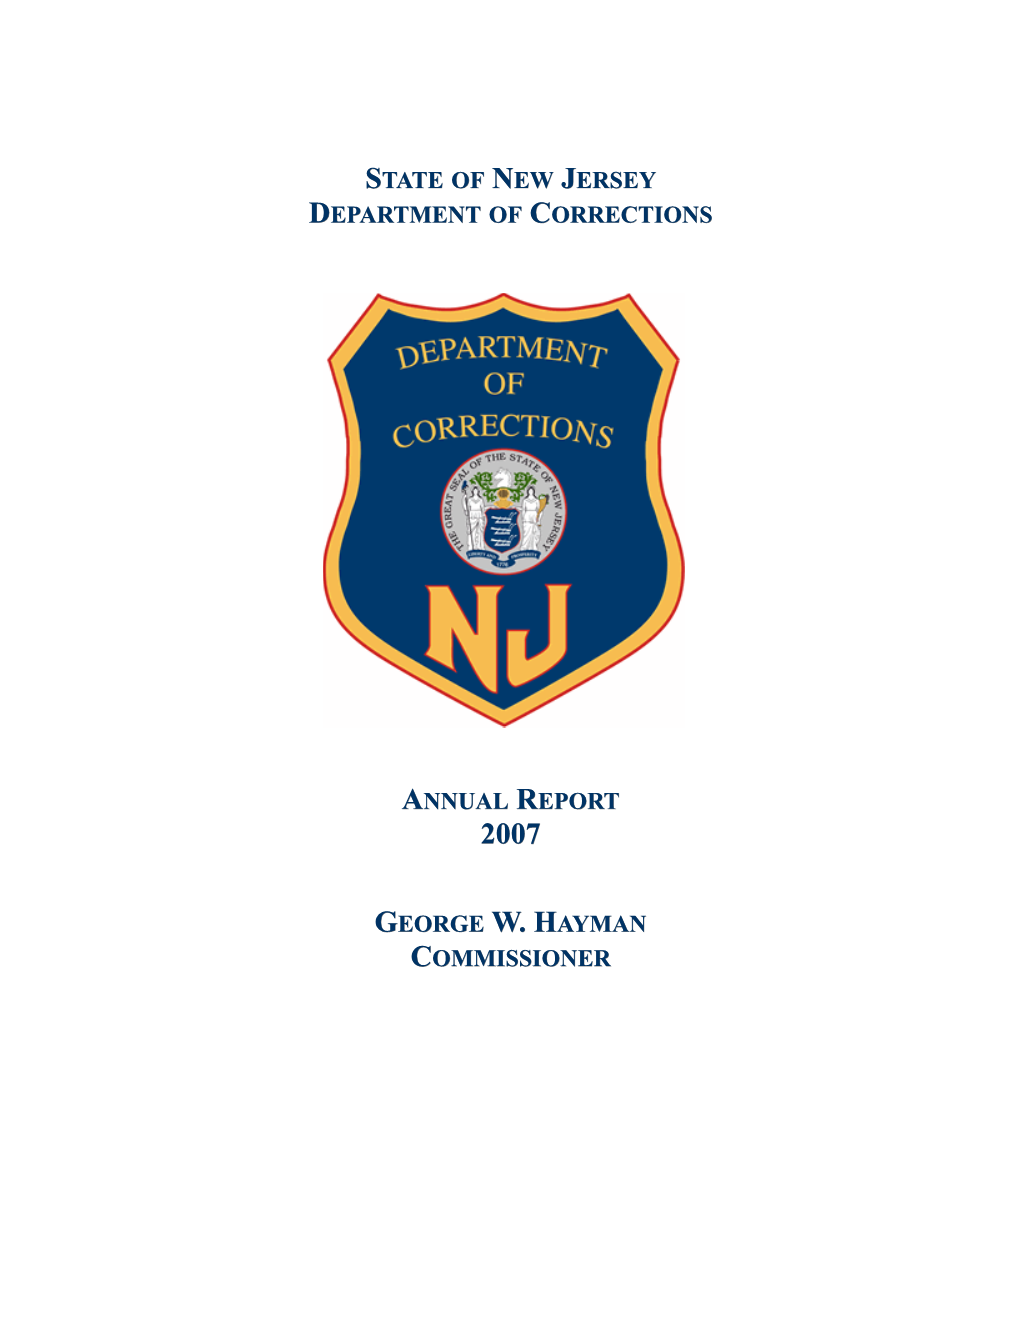 State of New Jersey Department of Corrections